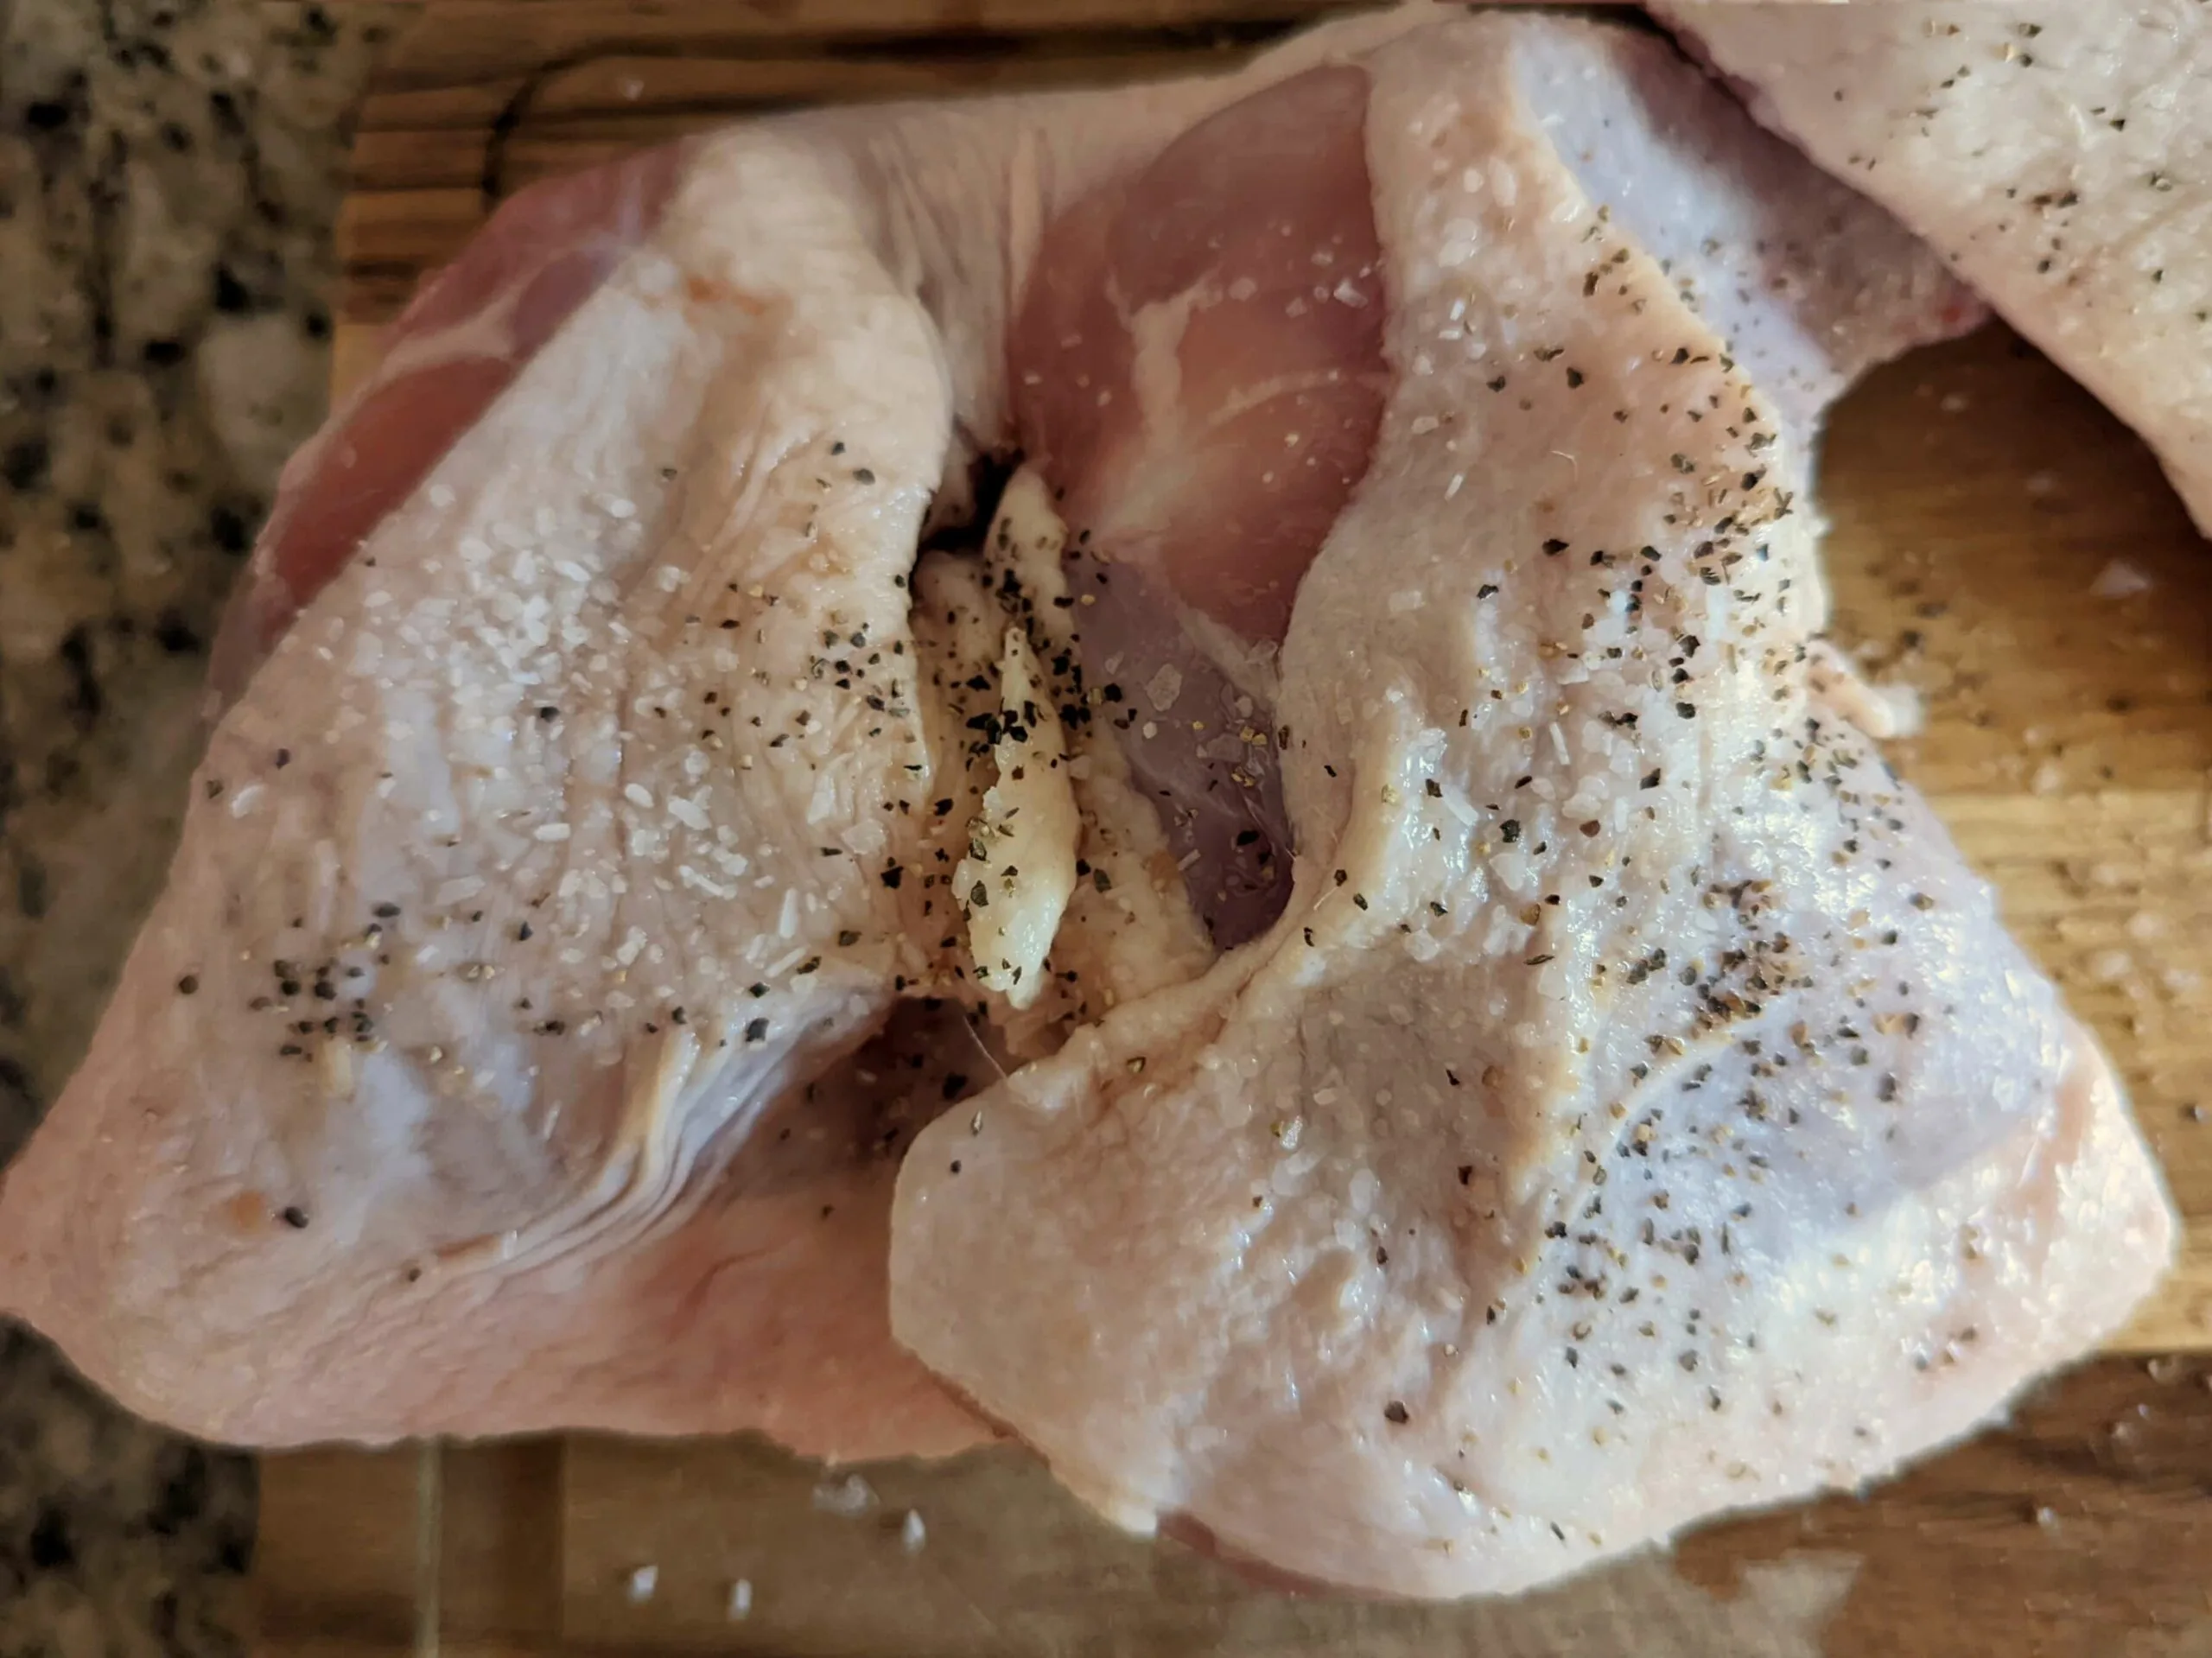 Season the chicken quarters with salt and pepper.